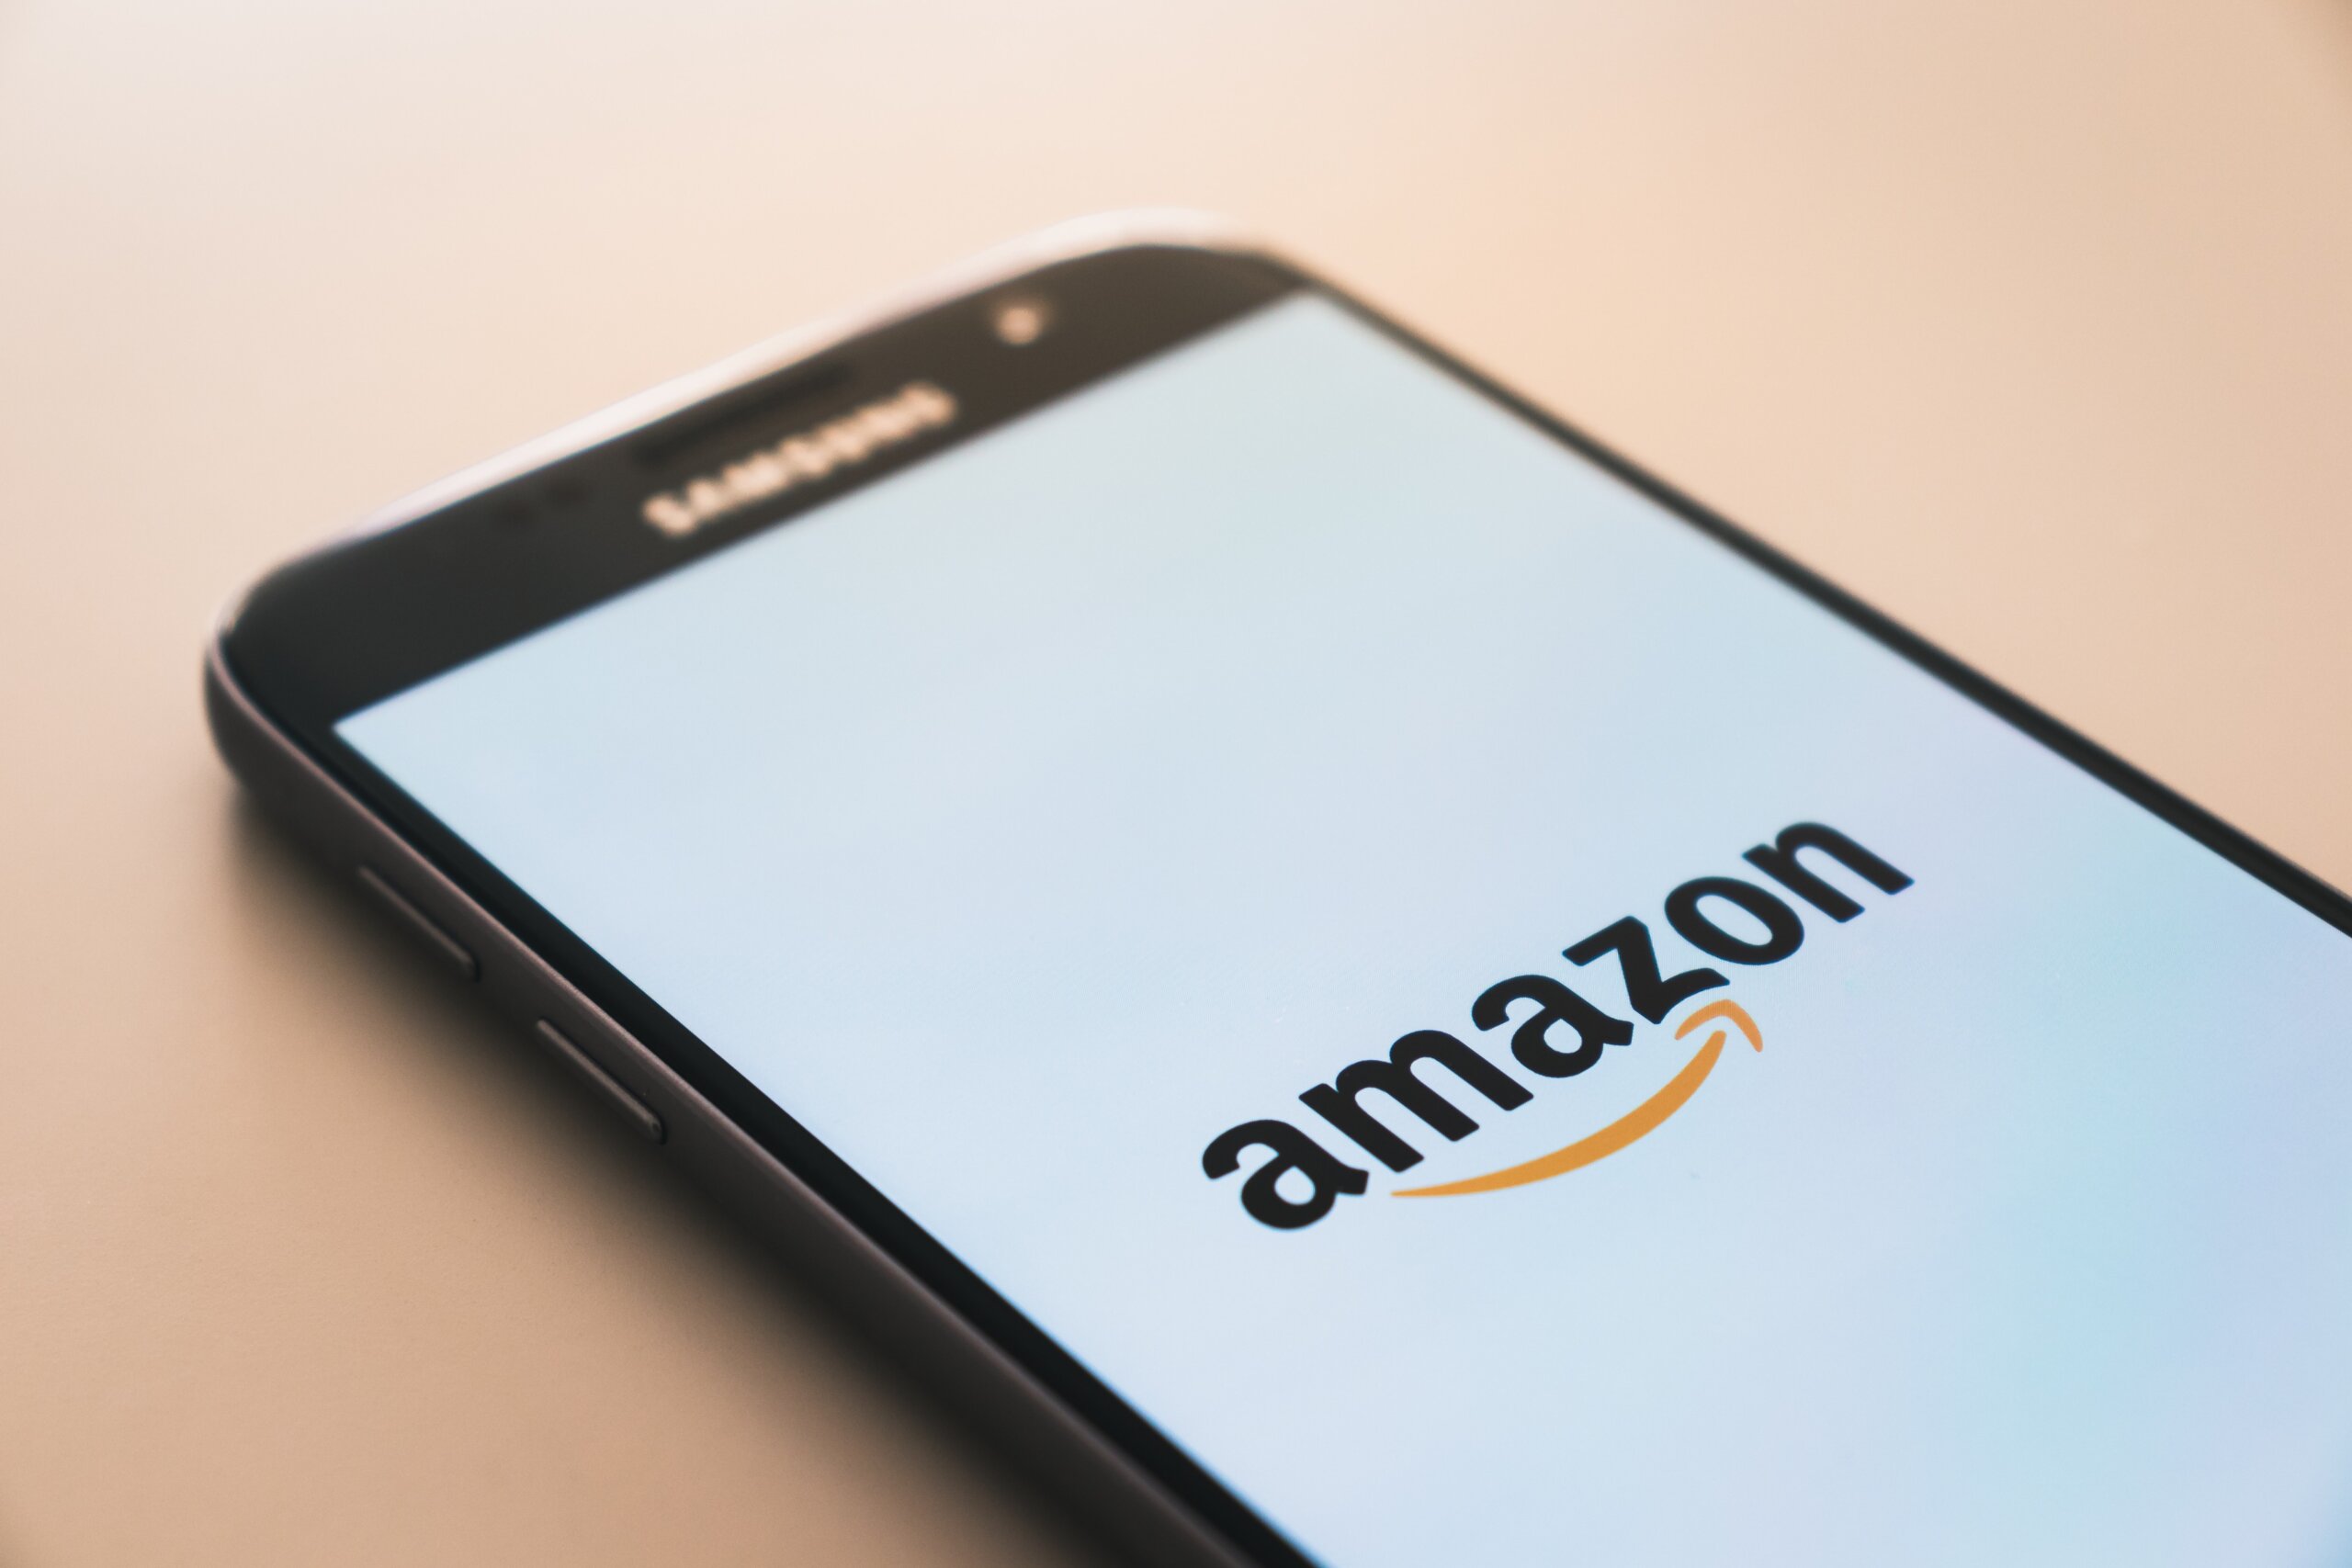 How to use Amazon ads to promote your business